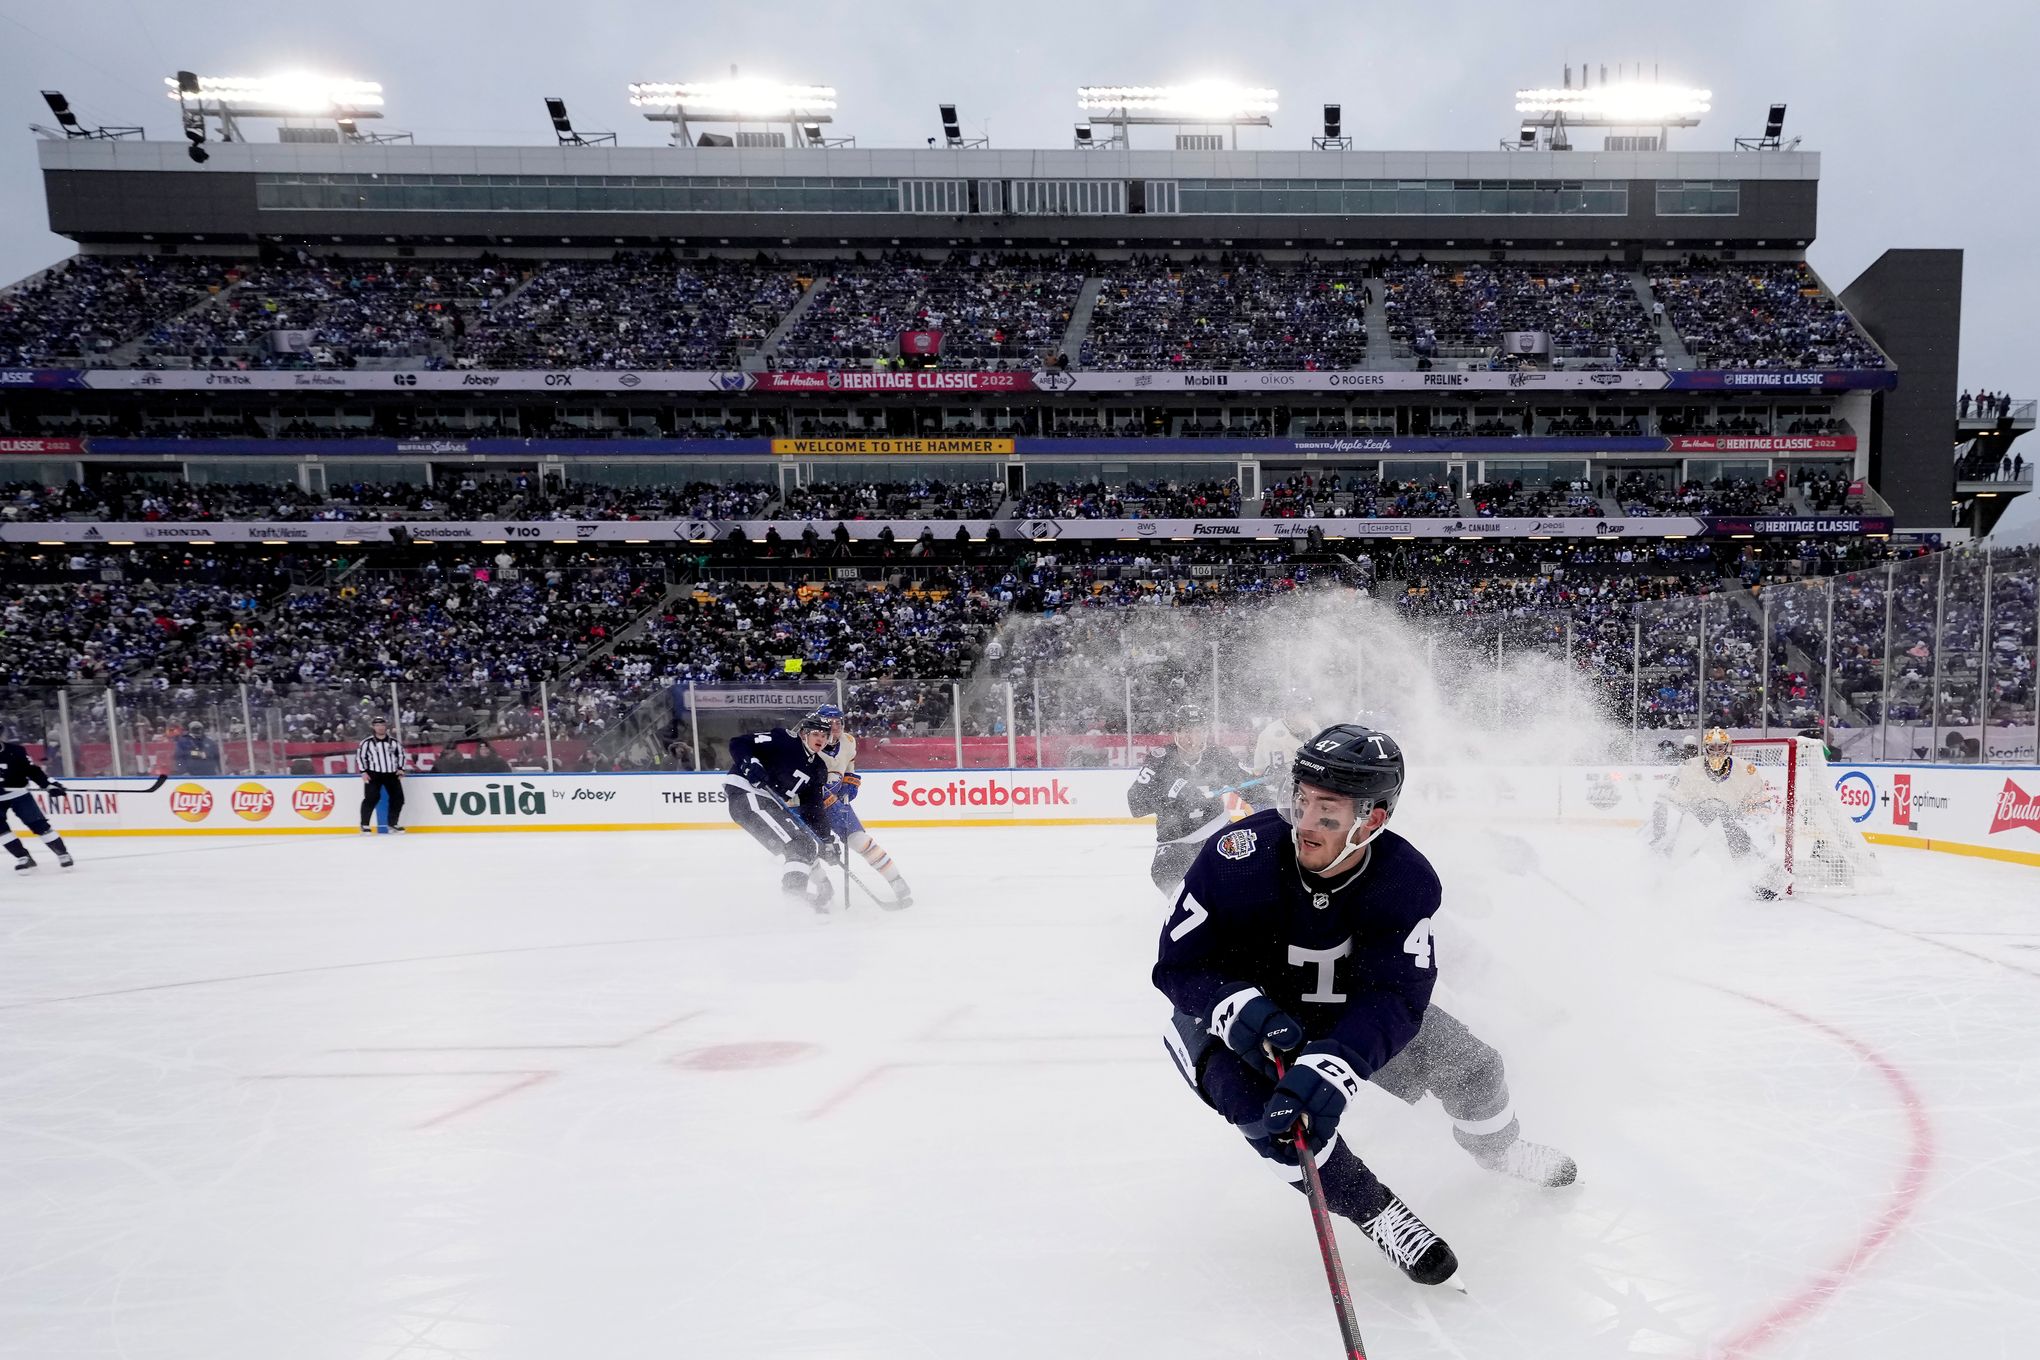 Tickets to 2022 NHL Heritage Classic in Hamilton on sale this week